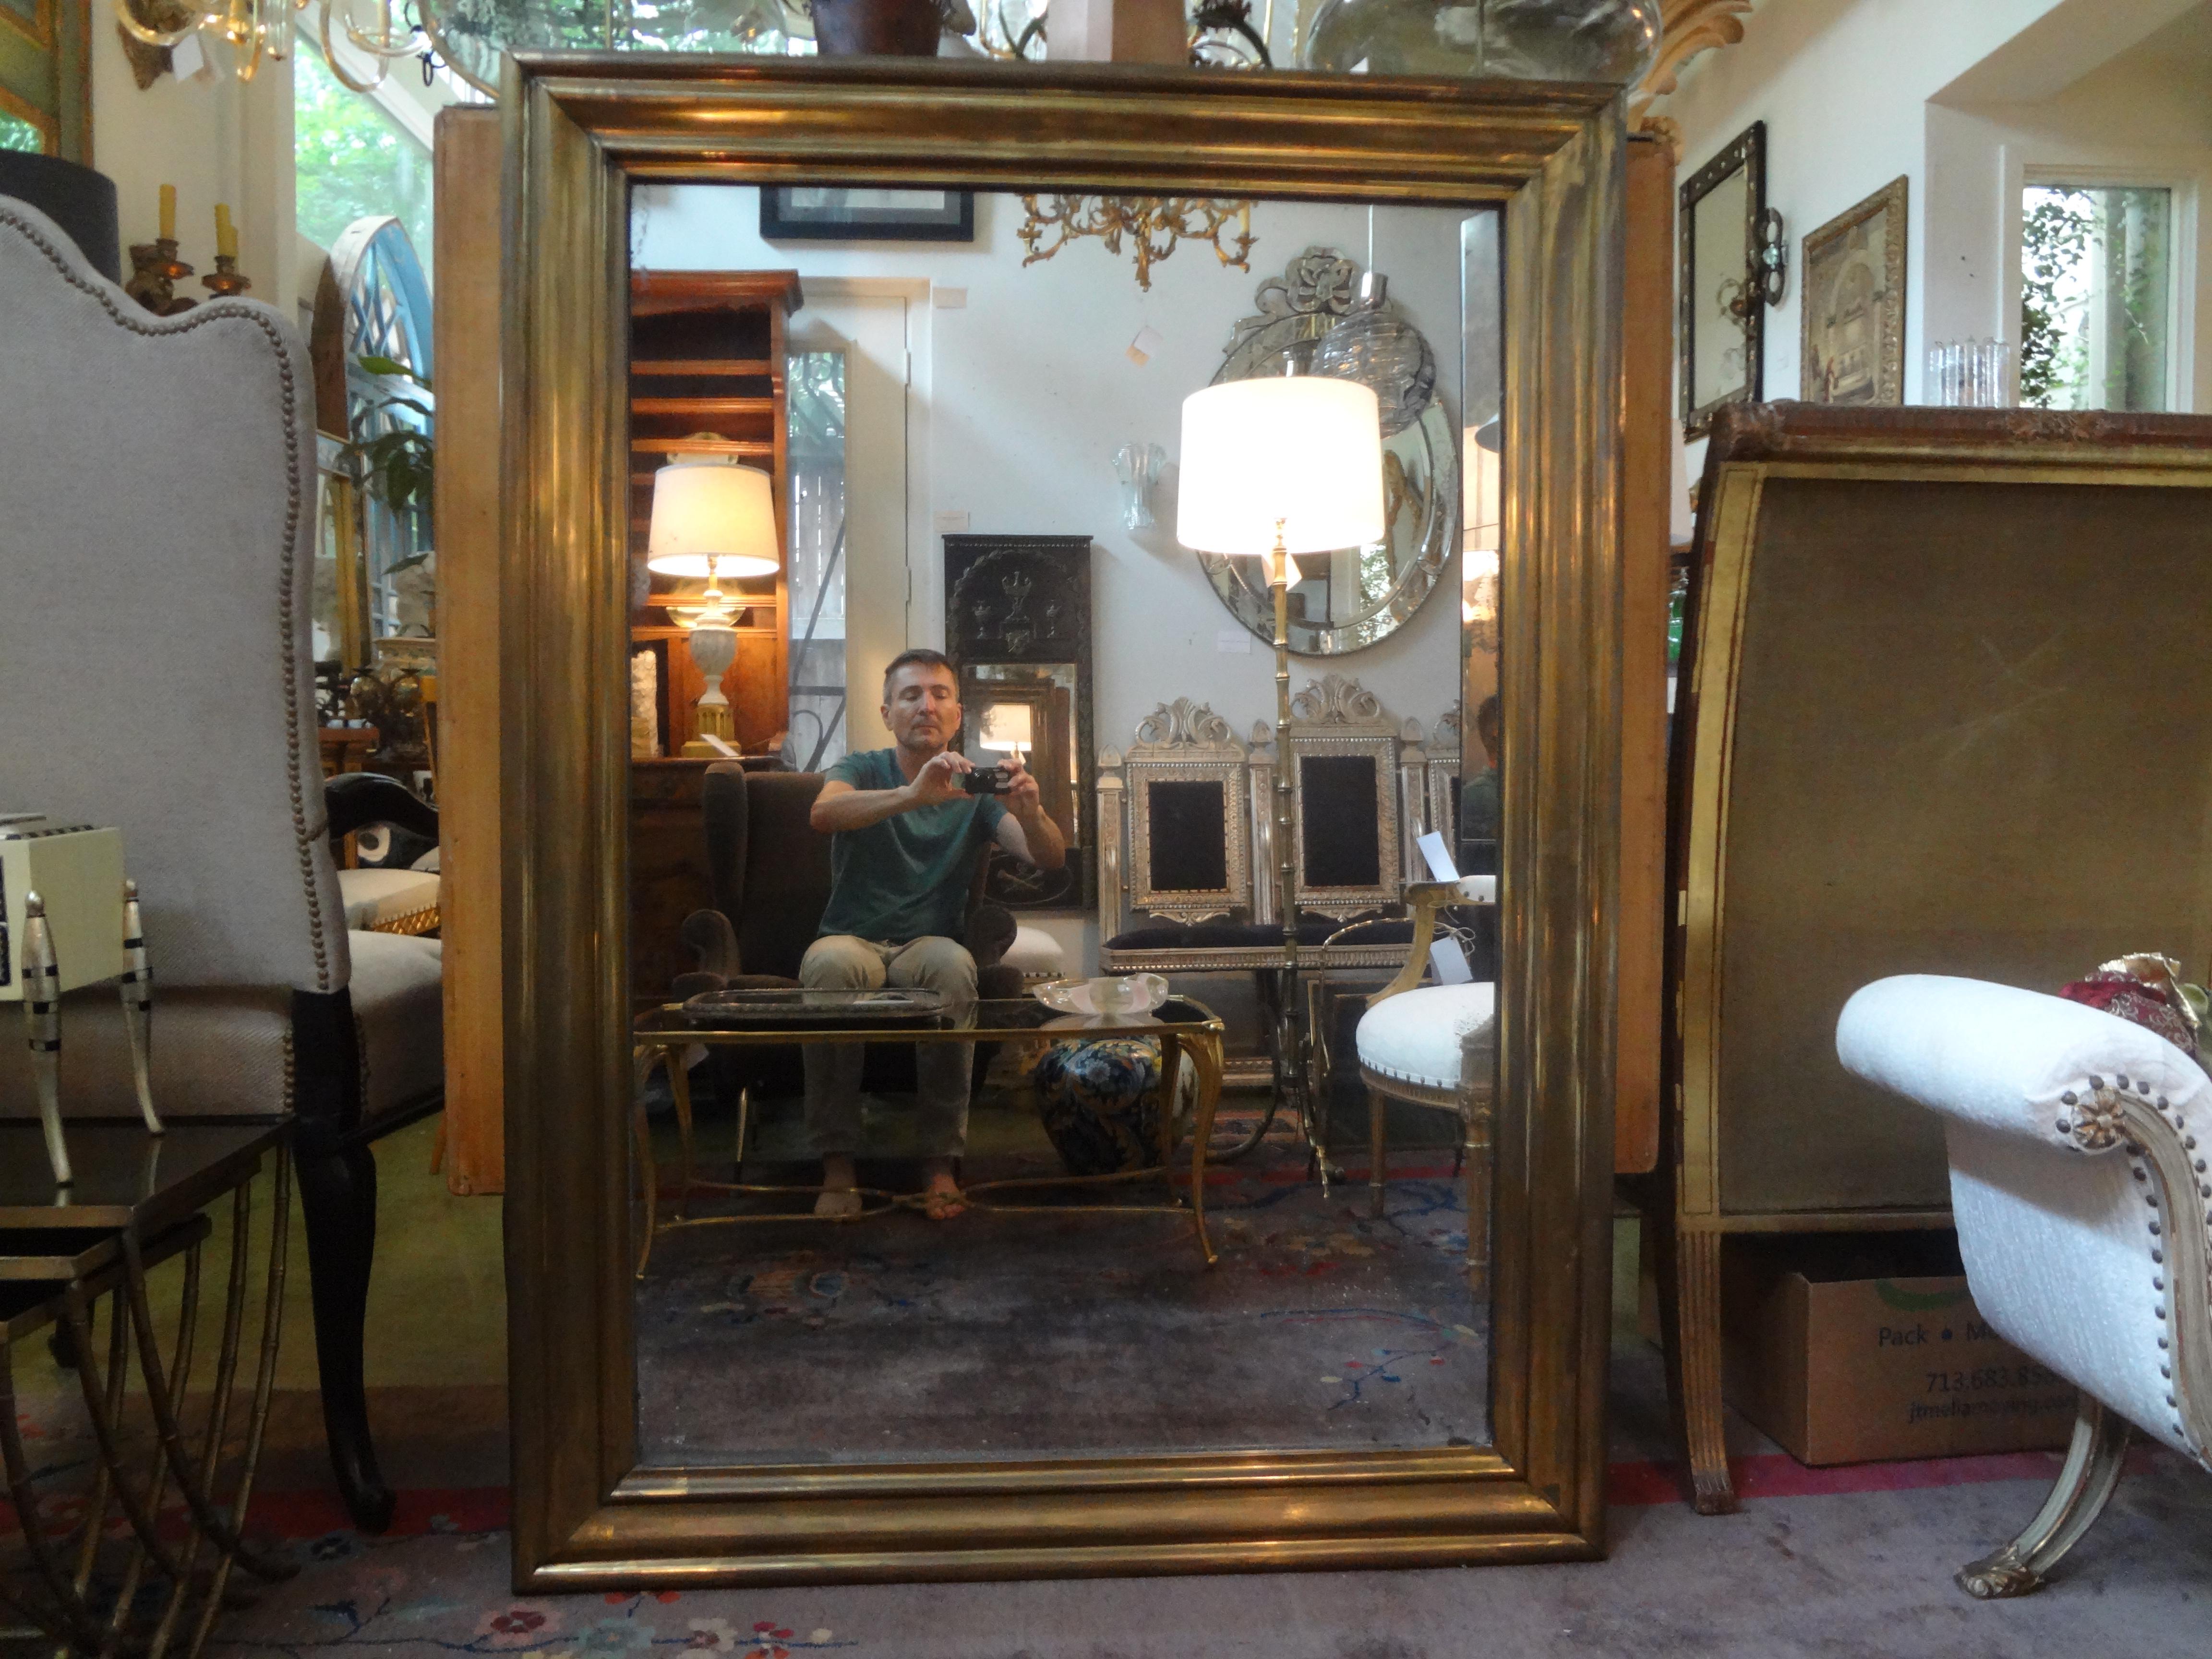 Large 19th century French Directoire style or Louis XVI style brass mirror with original wood back. This stunning full-length mirror has fabulous patina and would work well in a variety of rooms and interiors. It's possible to display this mirror